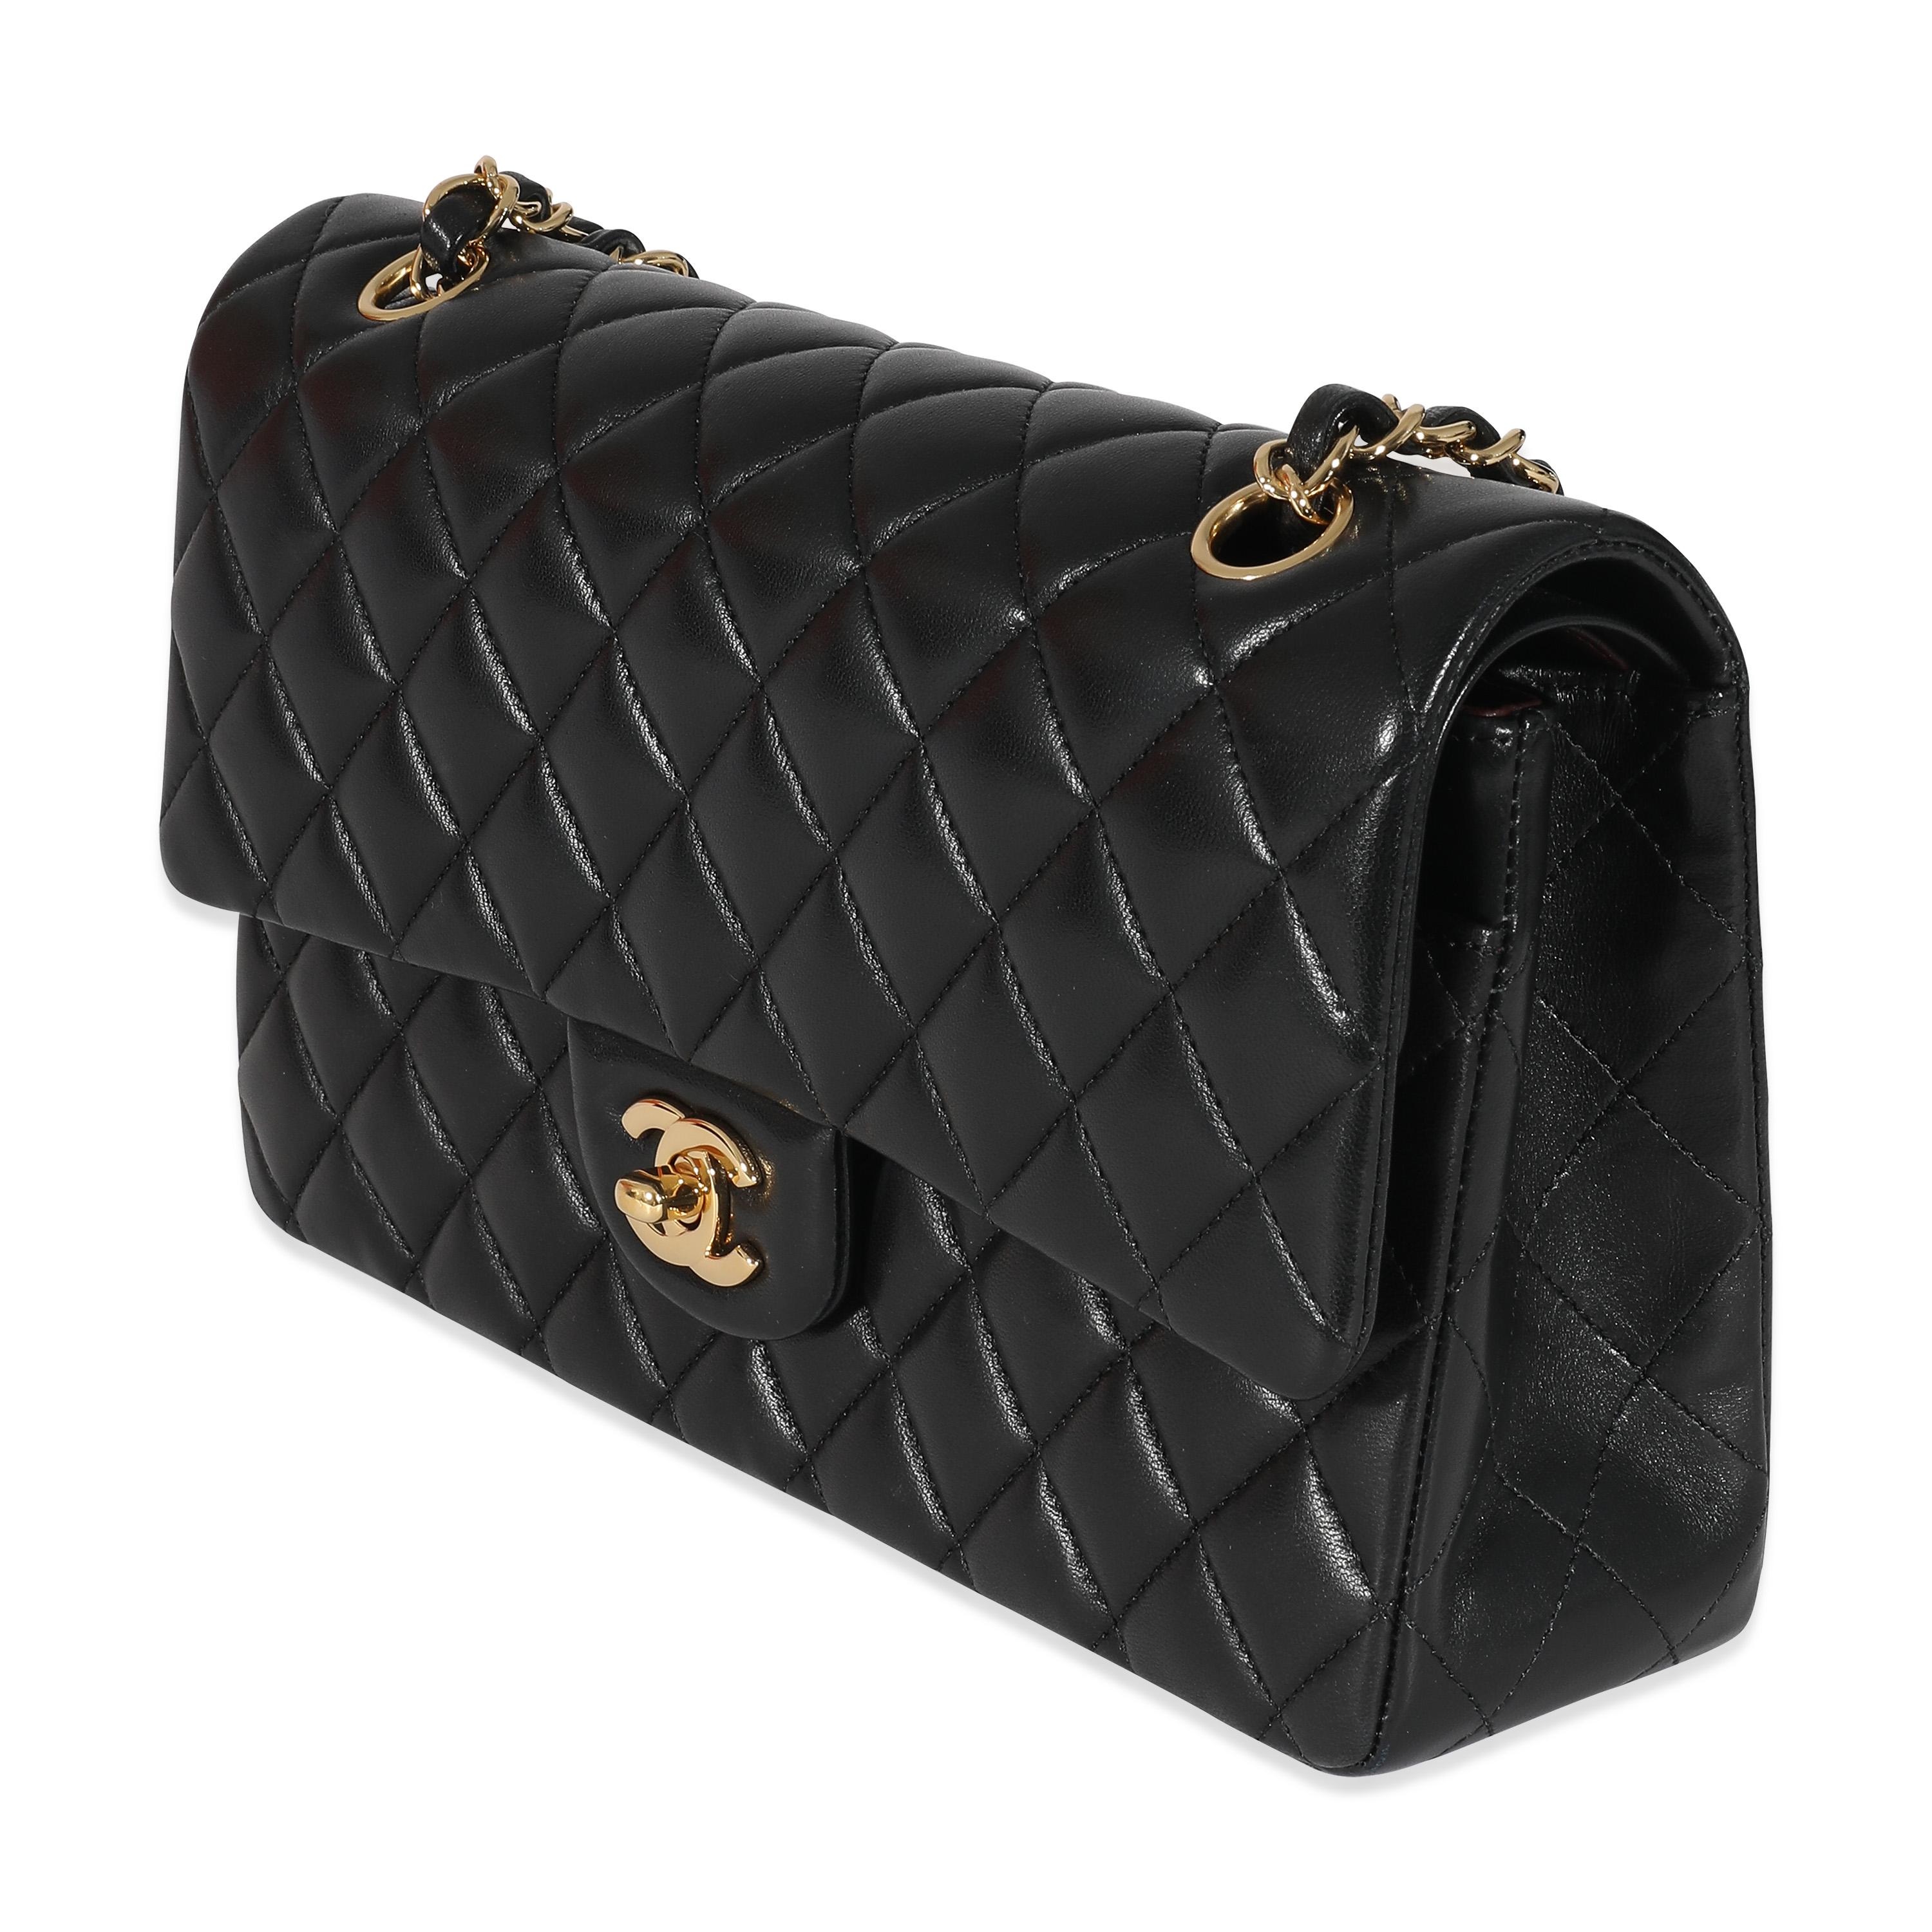 Chanel Black Quilted Lambskin Medium Classic Double Flap Bag In Excellent Condition For Sale In New York, NY